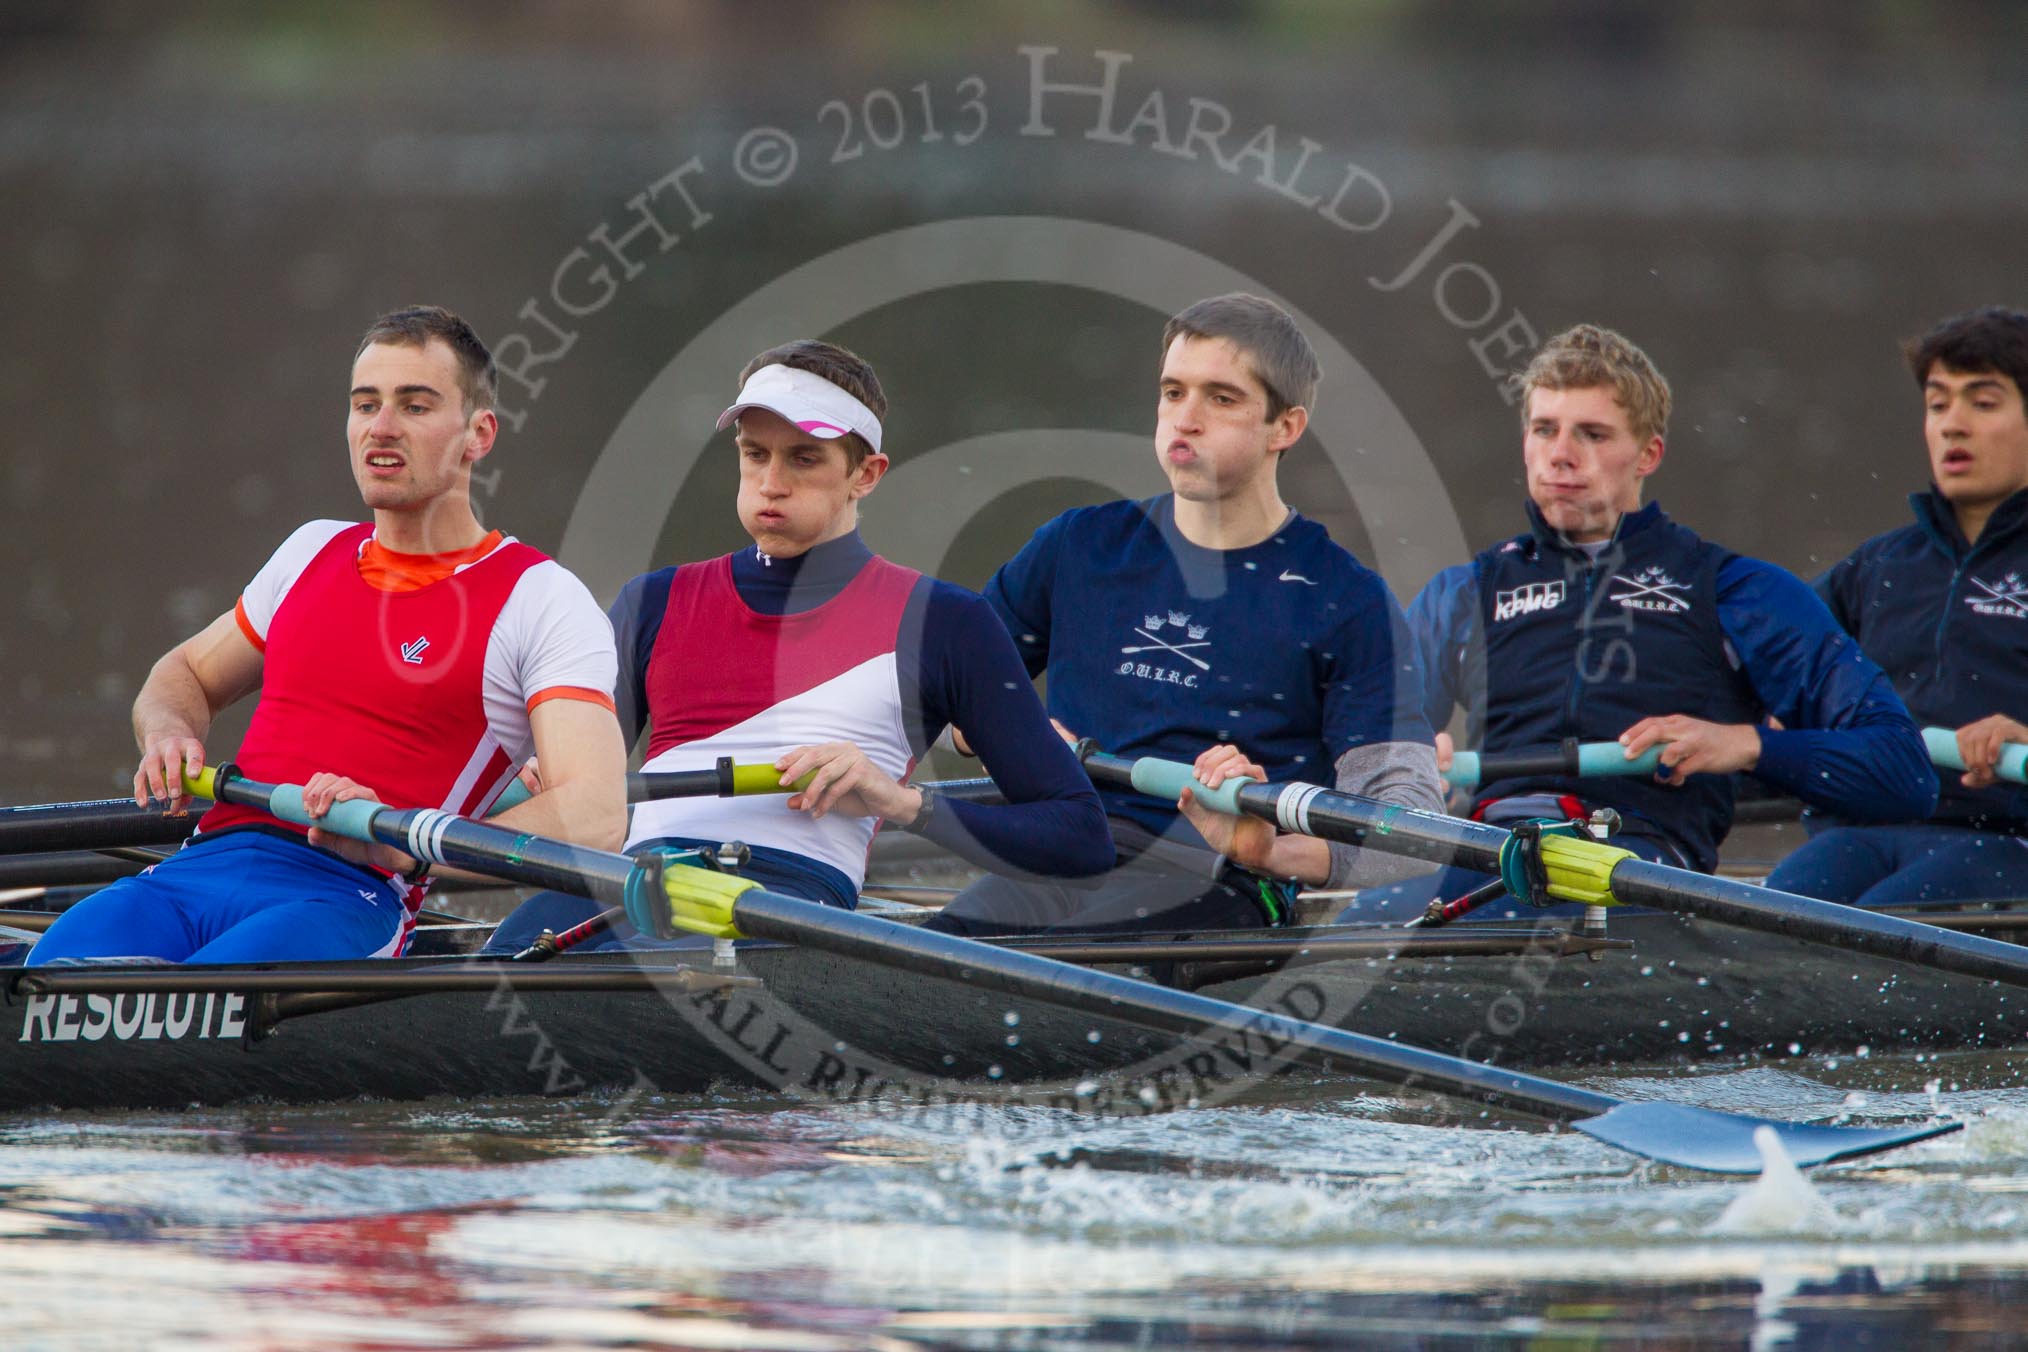 The Boat Race season 2013 - CUWBC training: The OULRC boat - stroke Max Dillon, 7 Andrew Sayce, 6 Benjamin Walpole, 5 Jasper Warner and 4 Frederick Foster..
River Thames near Remenham,
Henley-on-Thames,
Oxfordshire,
United Kingdom,
on 19 March 2013 at 16:29, image #140